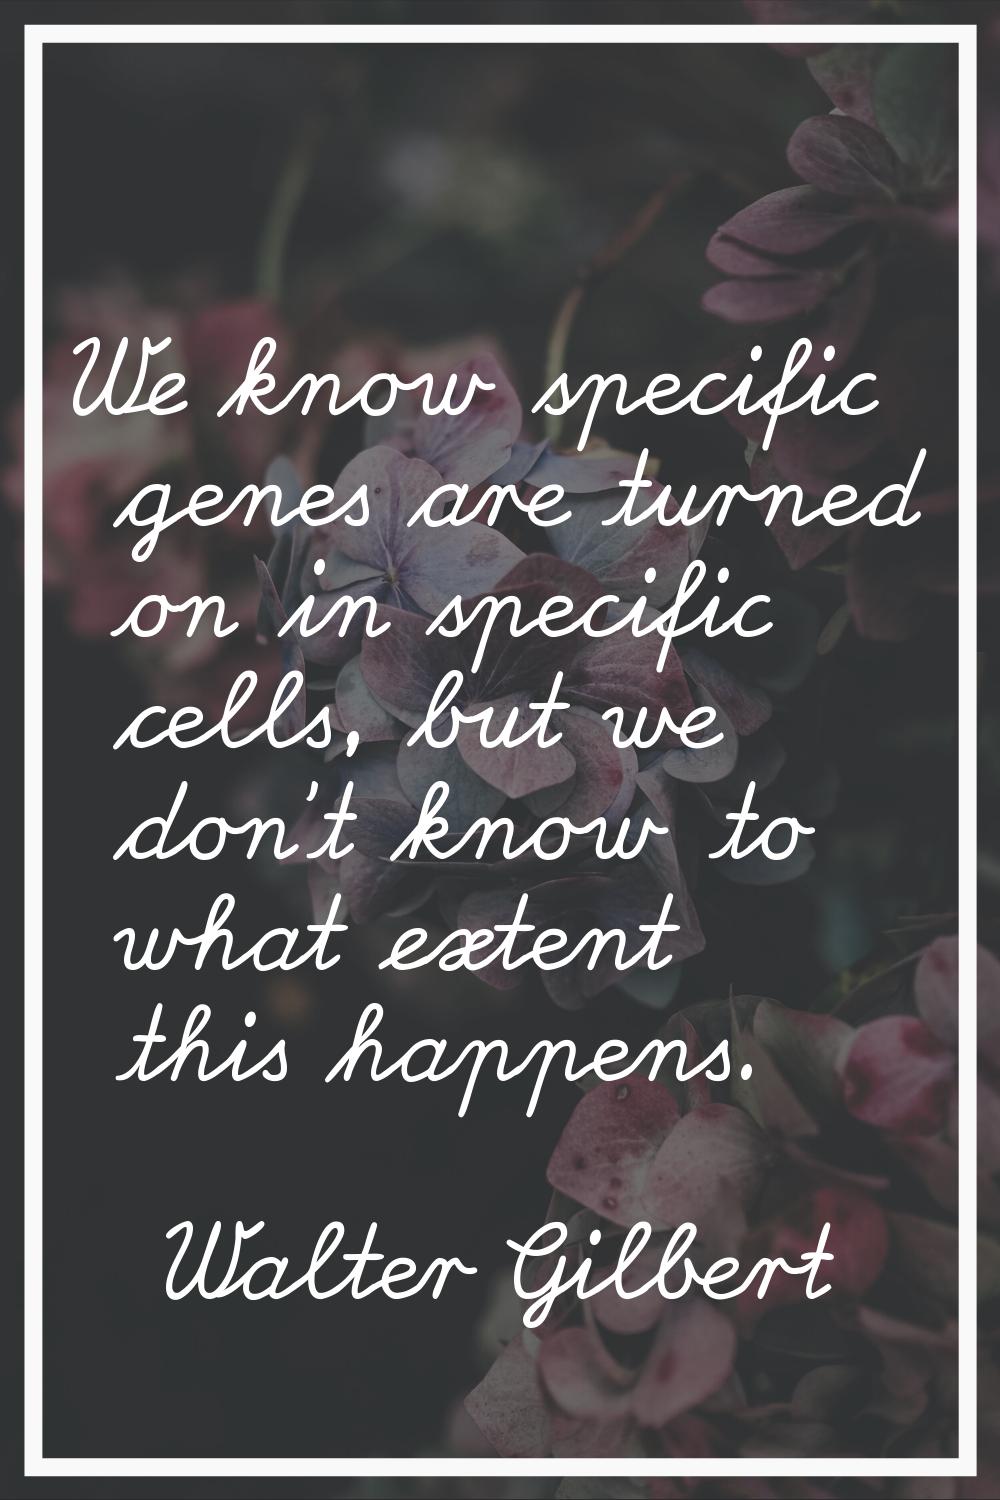 We know specific genes are turned on in specific cells, but we don't know to what extent this happe